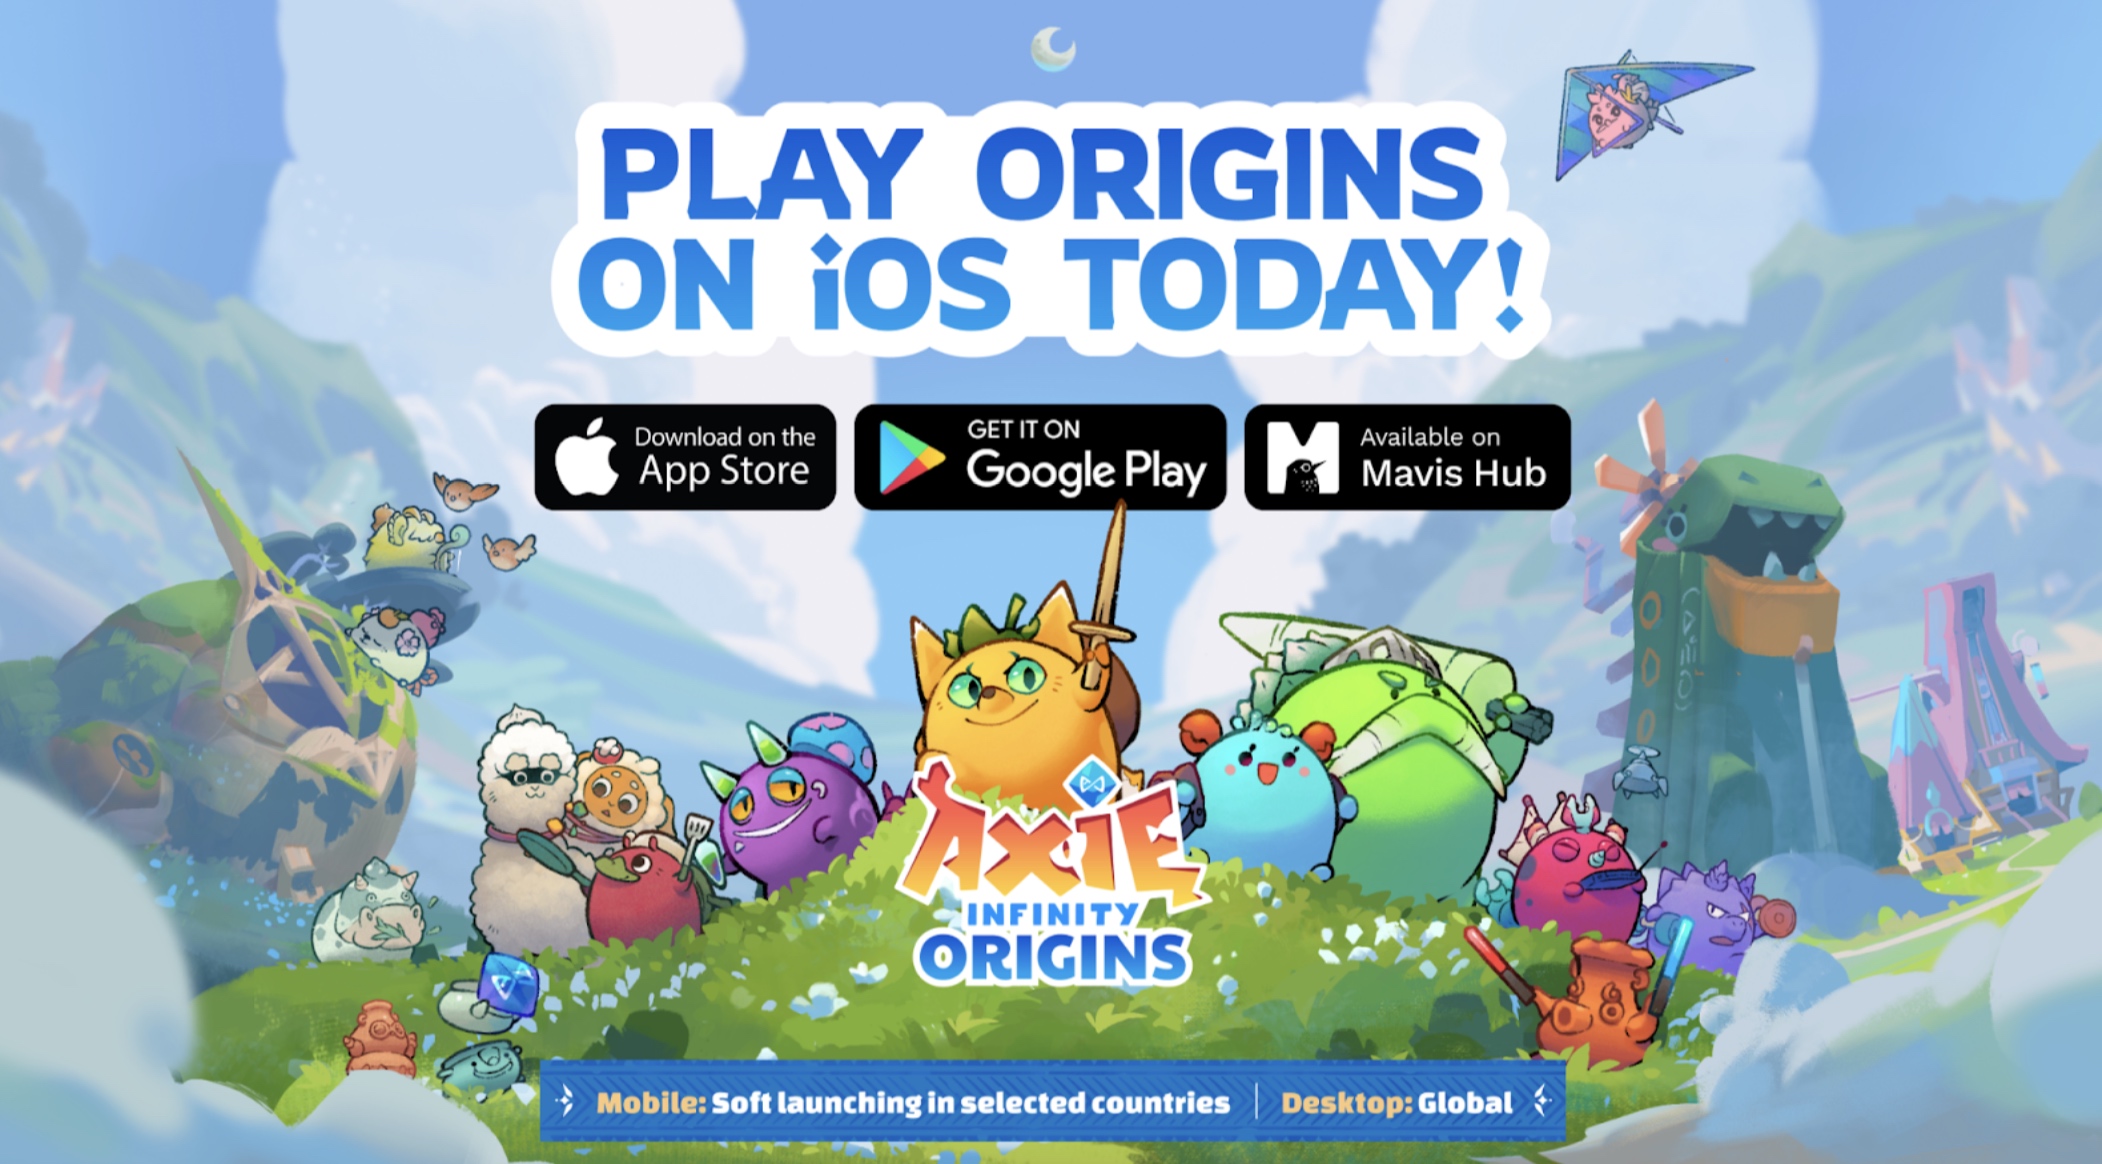 Sky Mavis Launches Blockchain-Based Game Axie Infinity Origins Marking a First for NFTs on iOS